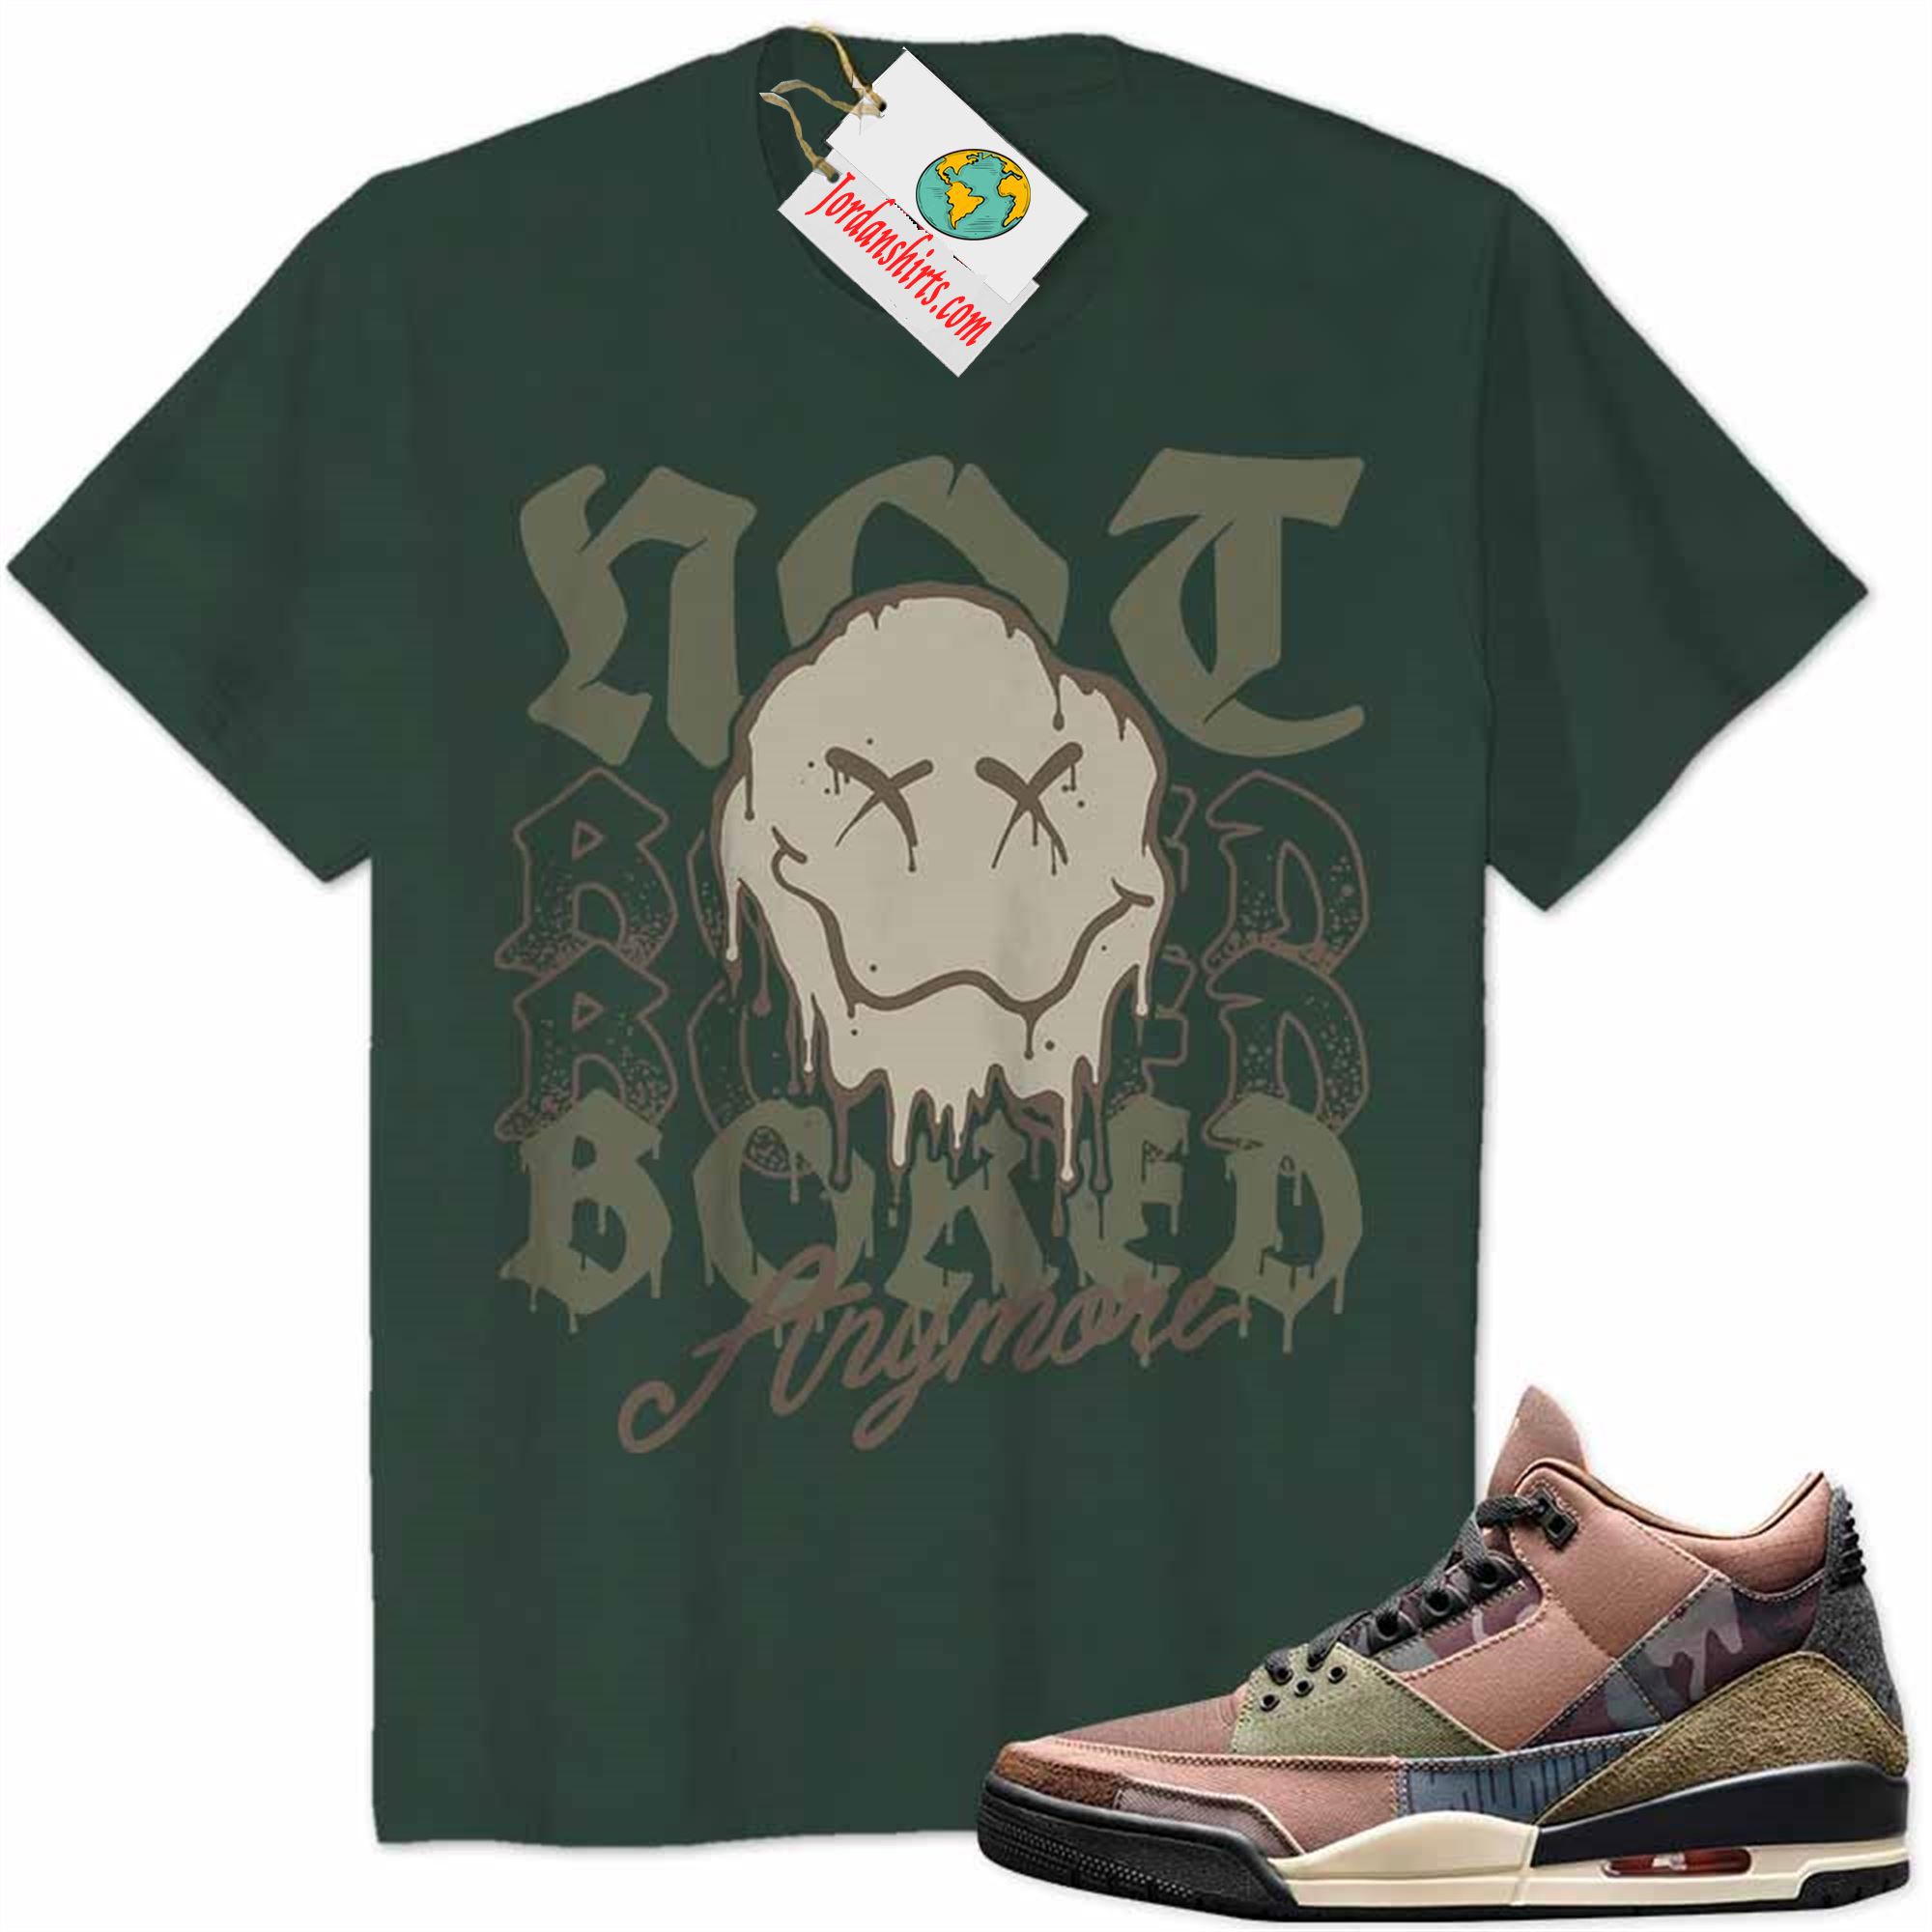 Jordan 3 Shirt, Drip Happy Face Not Bored Anymore Forest Air Jordan 3 Patchwork 3s Size Up To 5xl